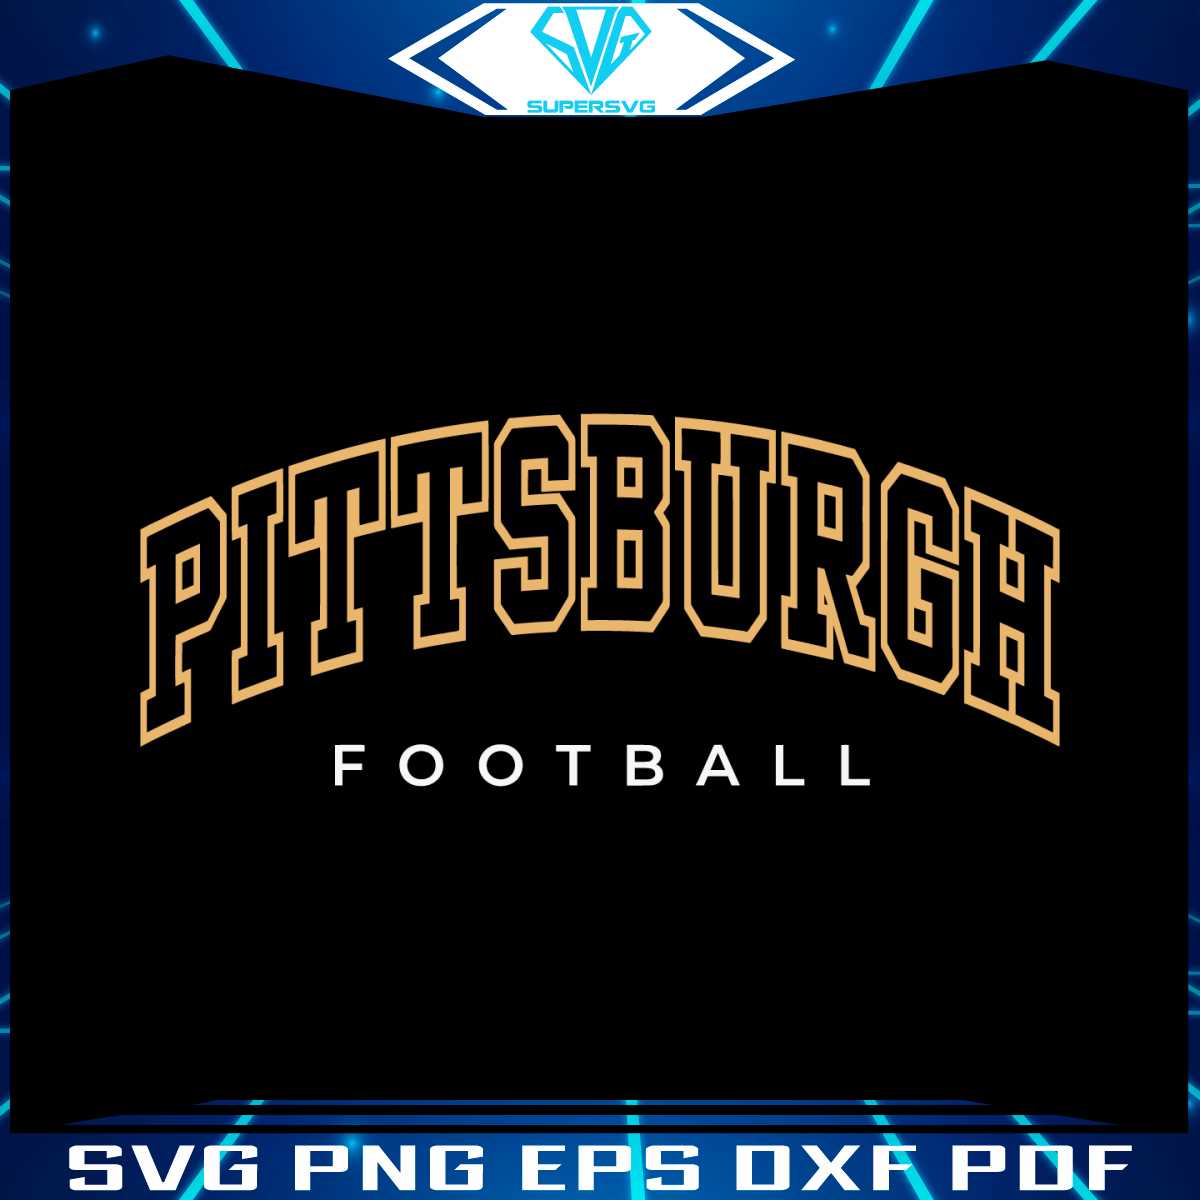 pittsburgh-football-svg-pittsburgh-panthers-ncaa-svg-file